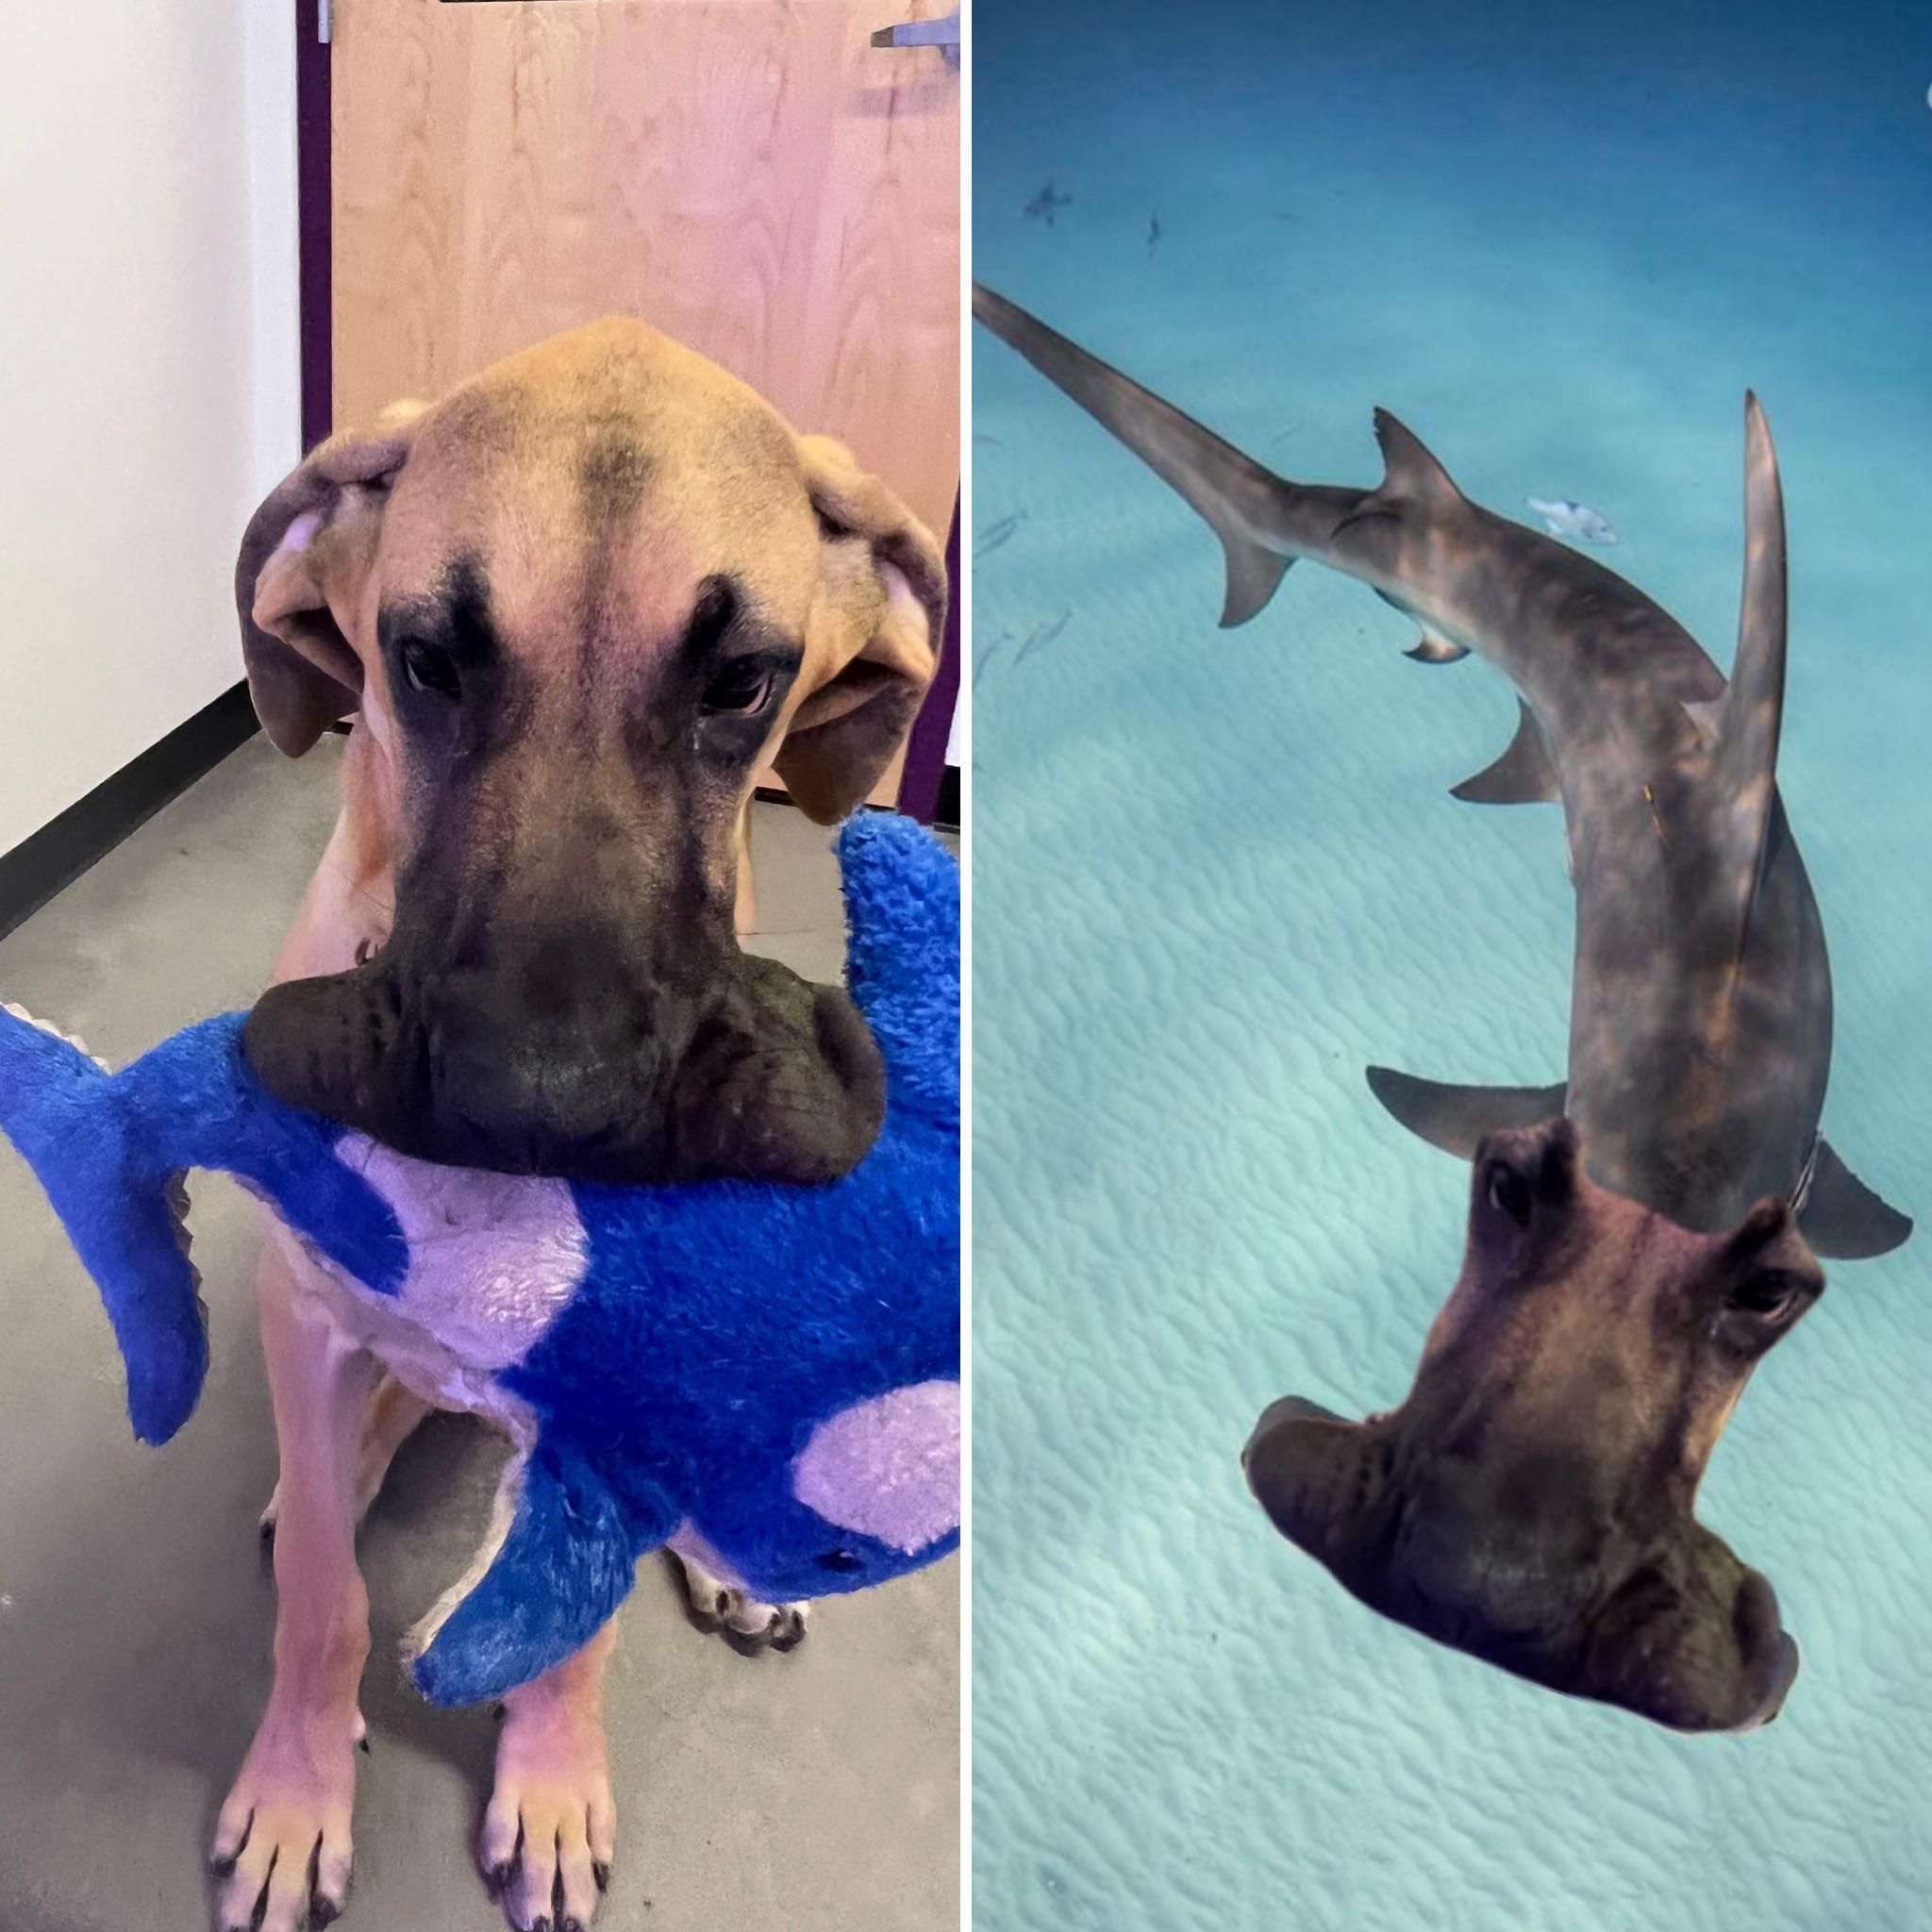 Somebody said he looks like a hammerhead shark in the first picture - I can’t unsee it!